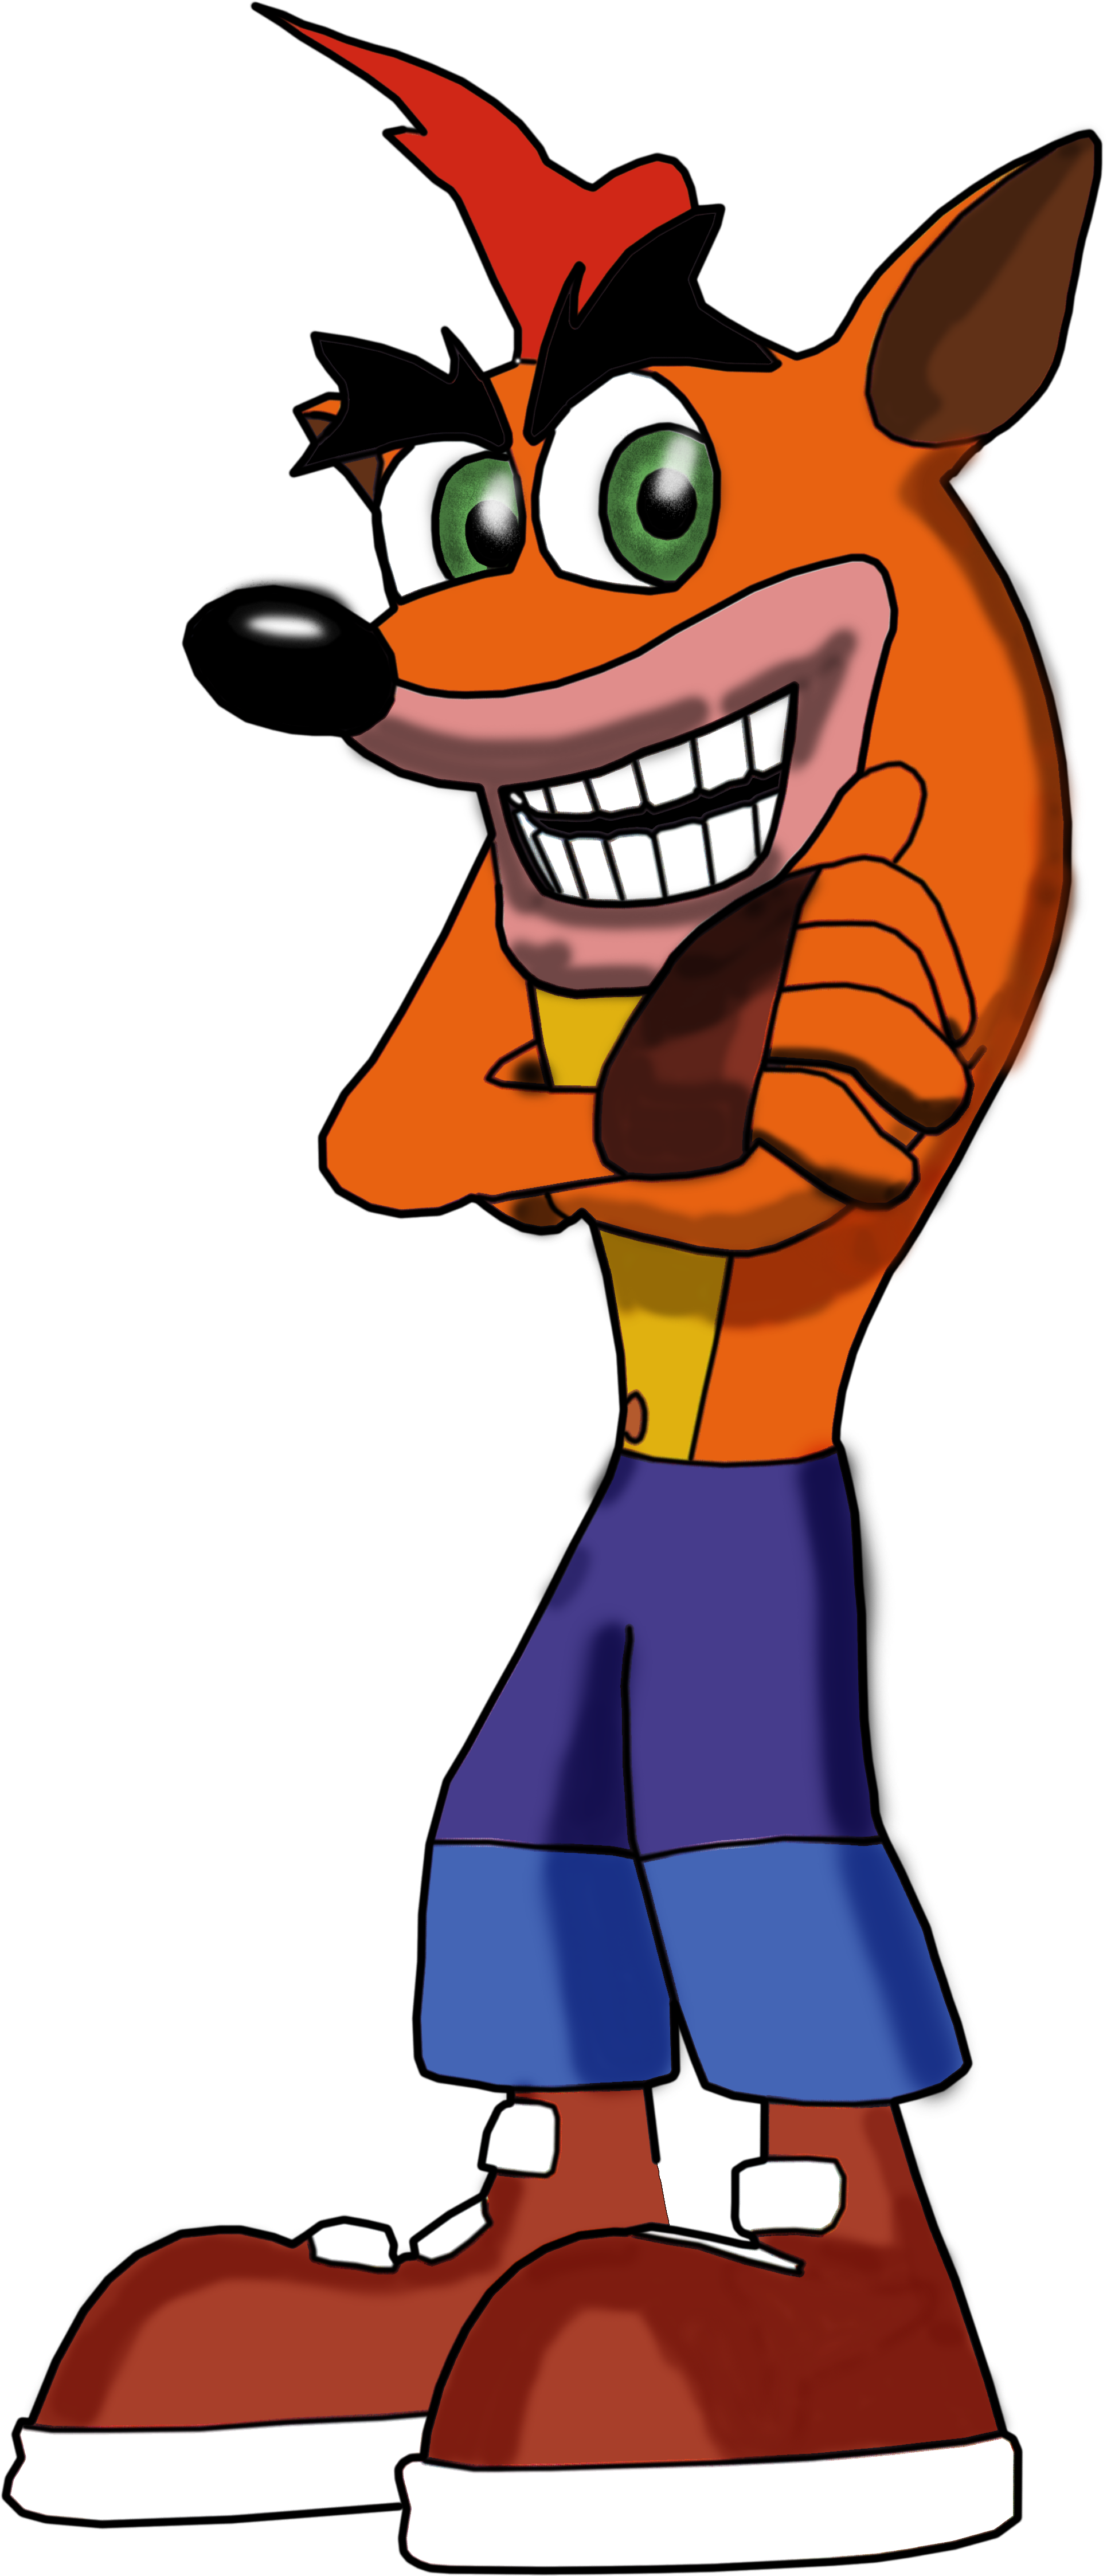 Gamefighter3000 Crash Bandicoot Classic By Gamefighter3000 - Crash Bandicoot Art Png (2608x4592)